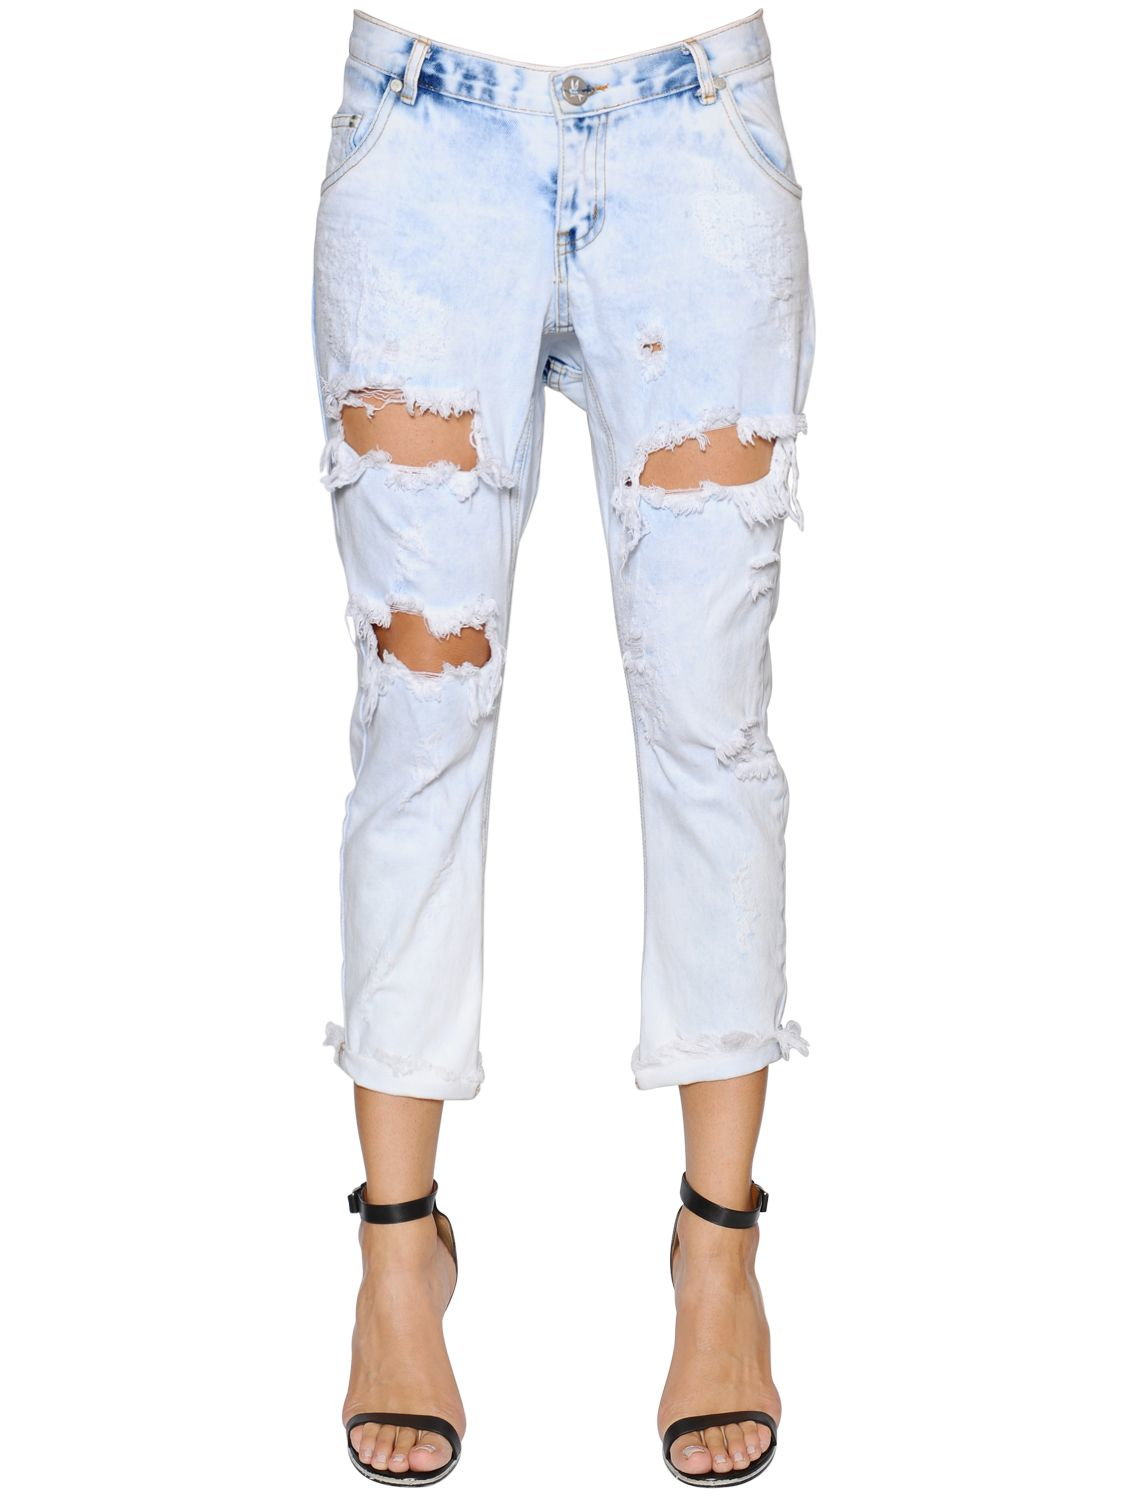 Lyst - One teaspoon Lonely Boys Destroyed Cotton Denim Jeans in Blue